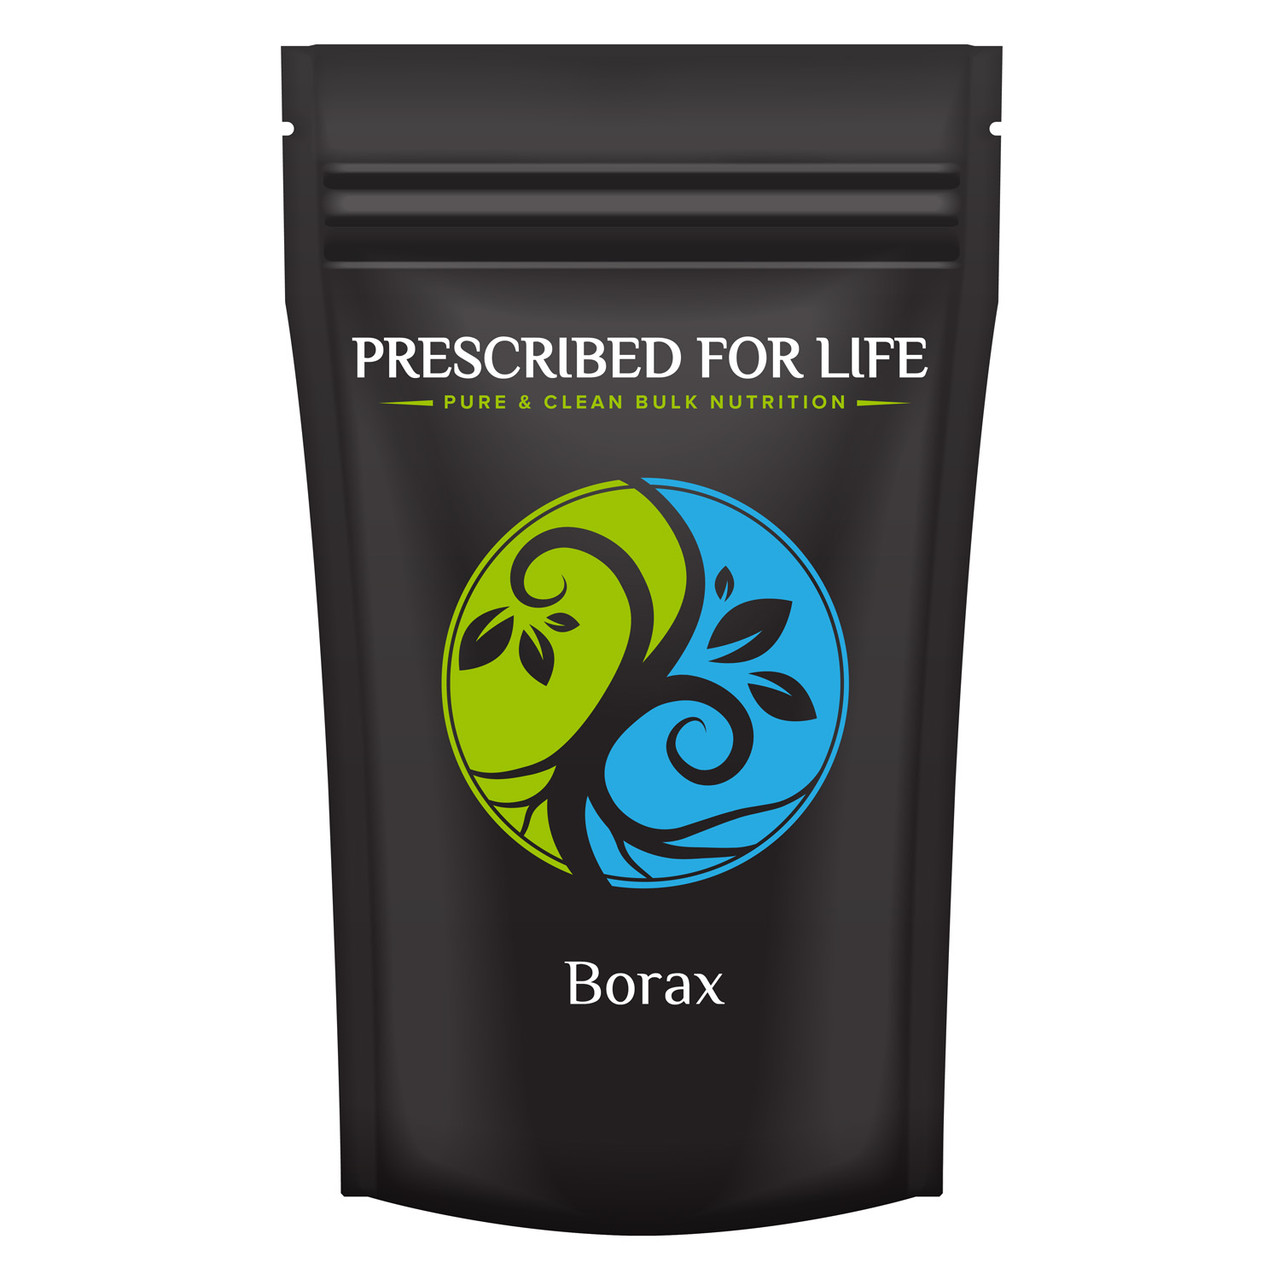 Borax: The Safe And Effective Detergent